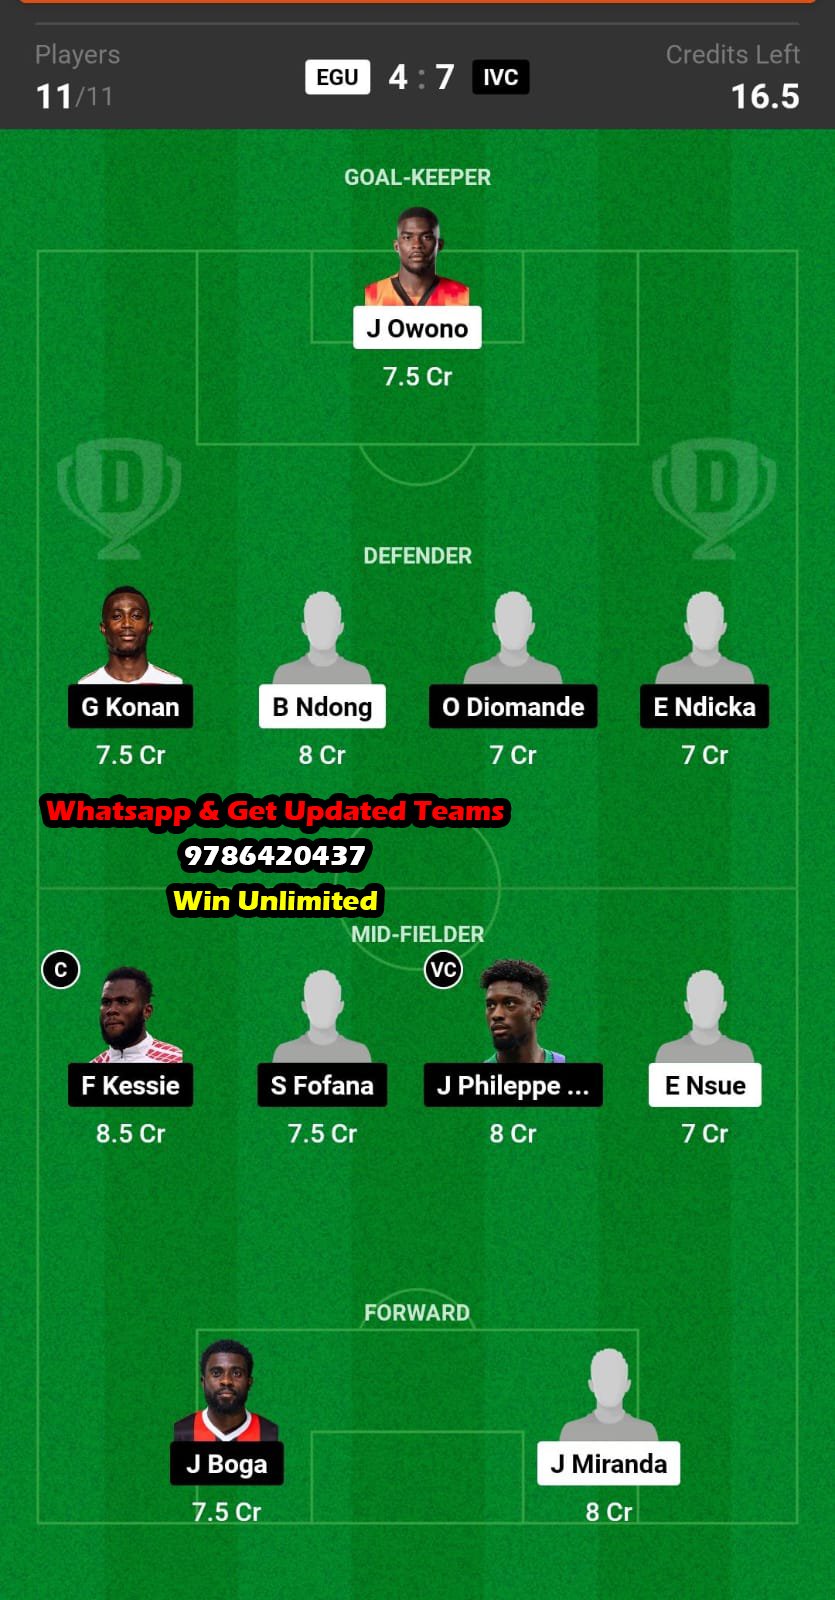 EGU vs IVC Dream11 Team fantasy Prediction African Cup of Nations